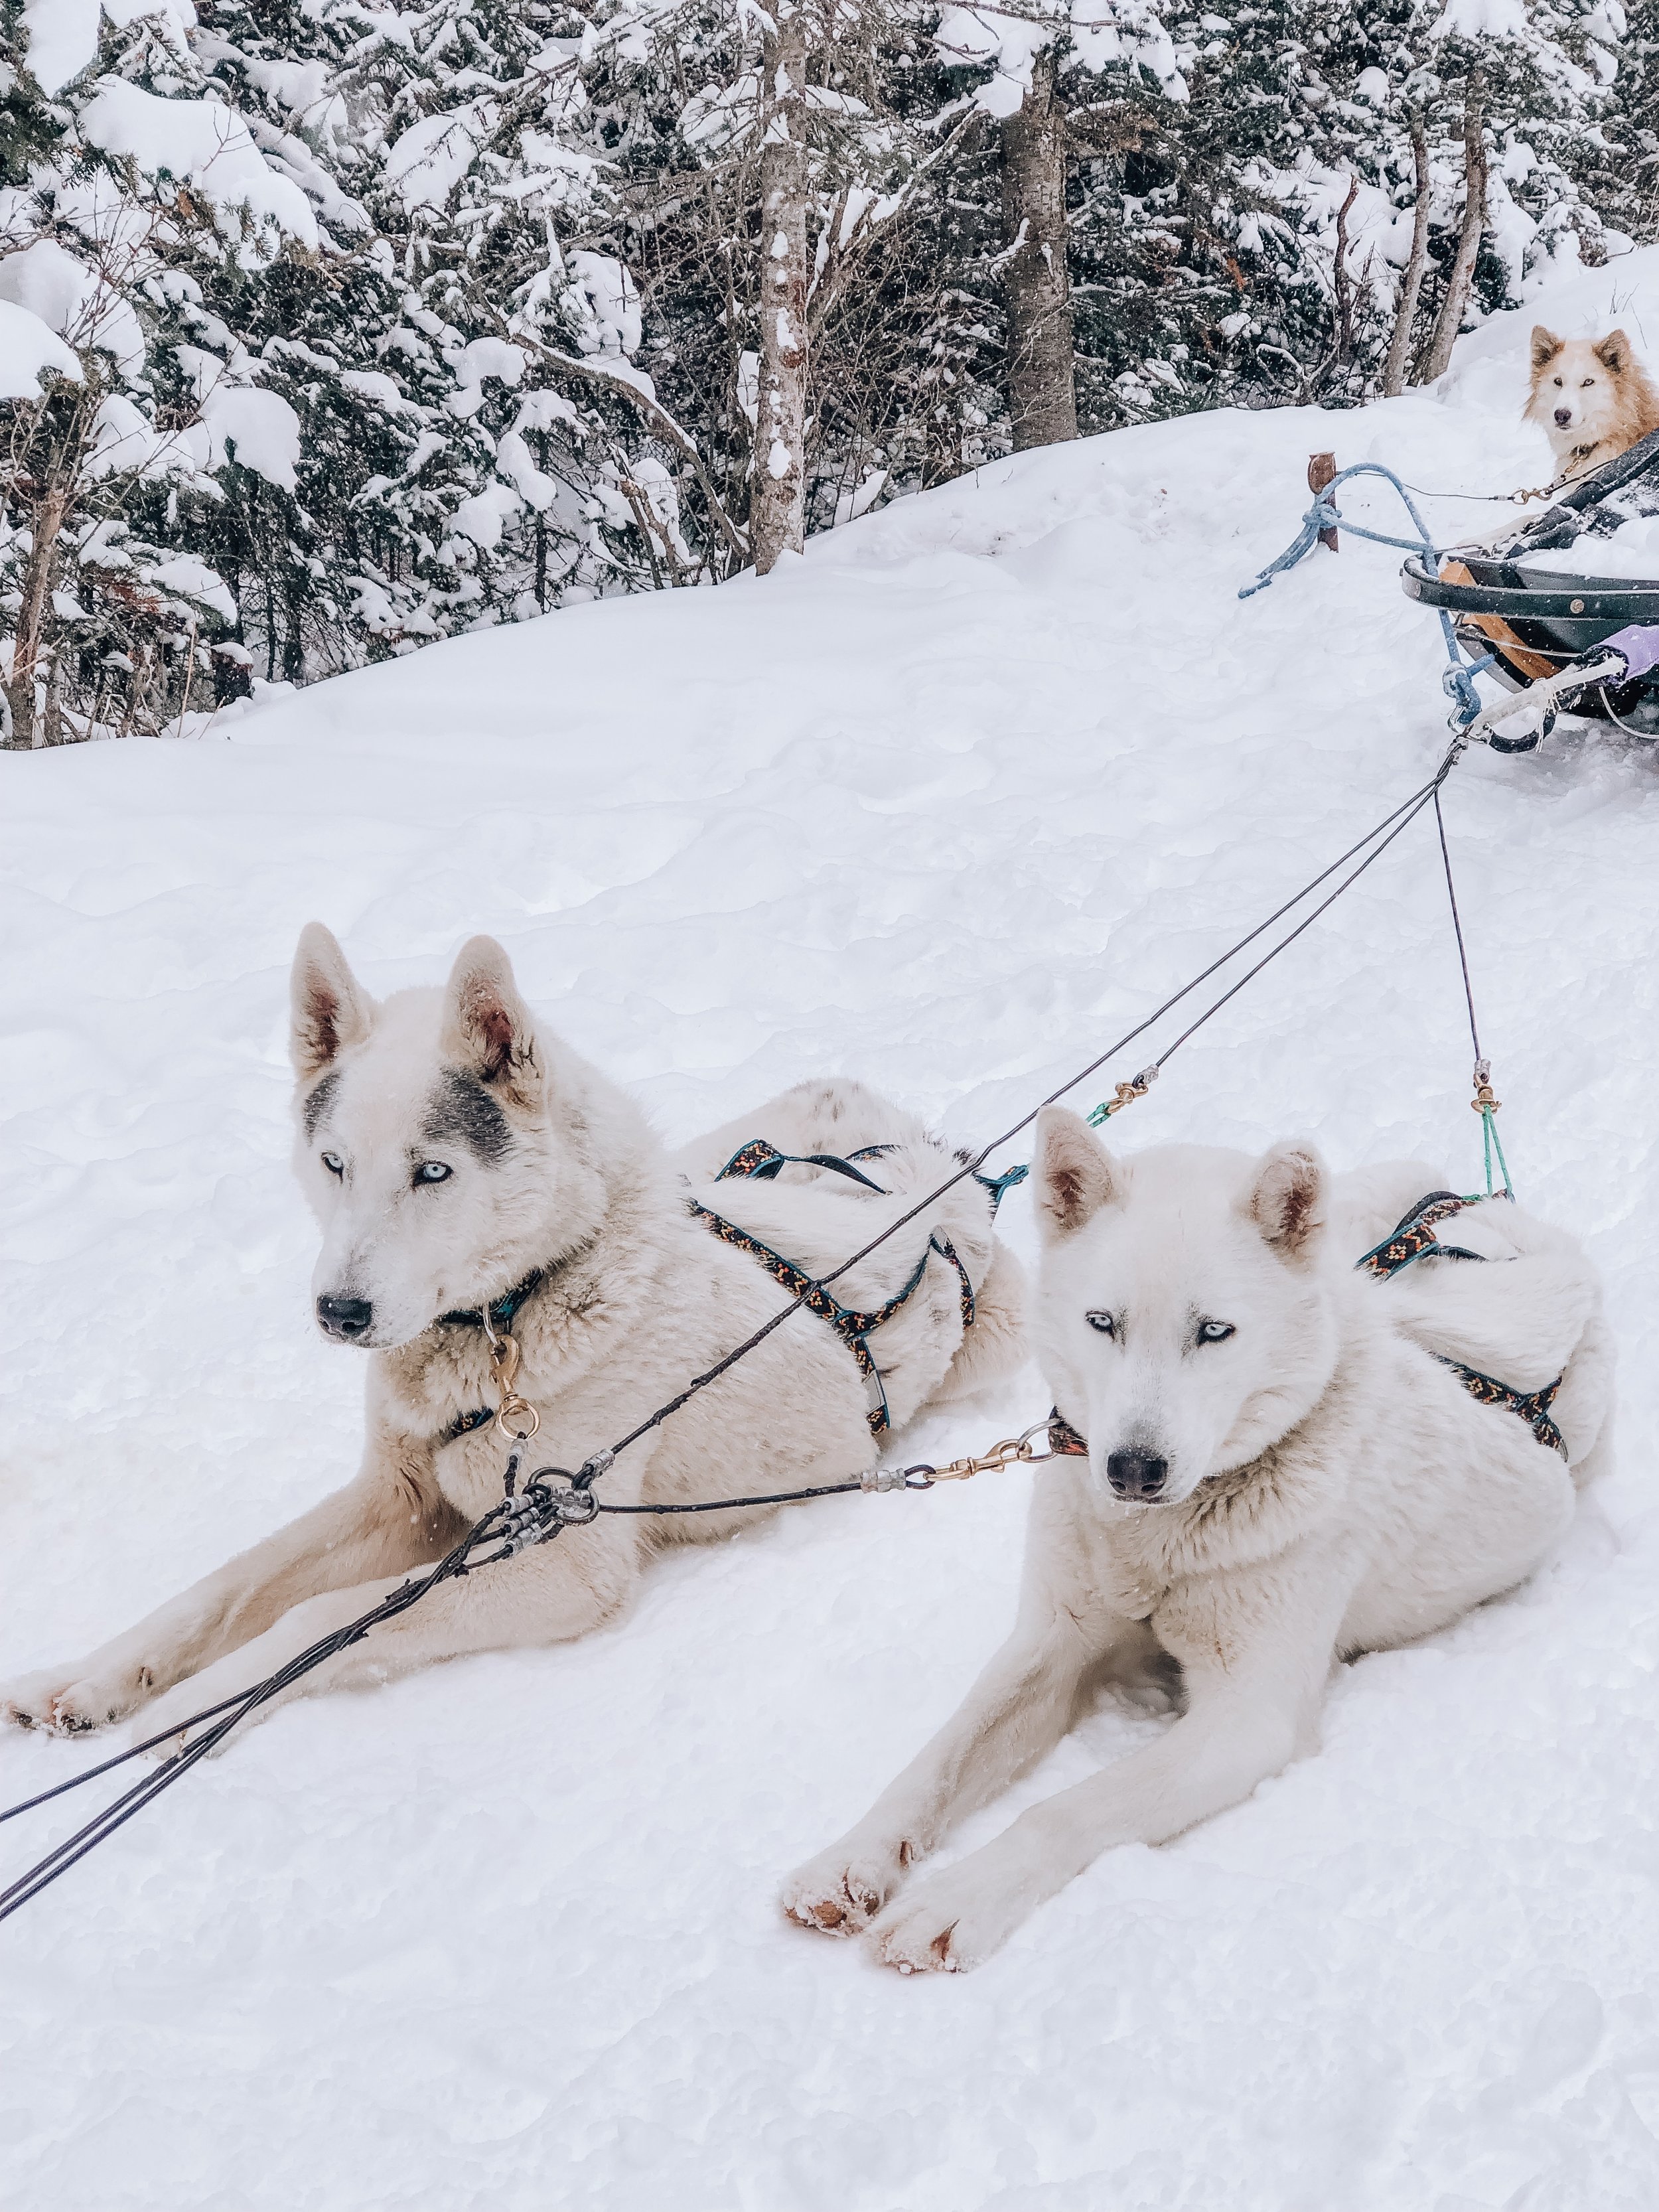 How To Book a Dog Sledding Tour in Banff, Canada